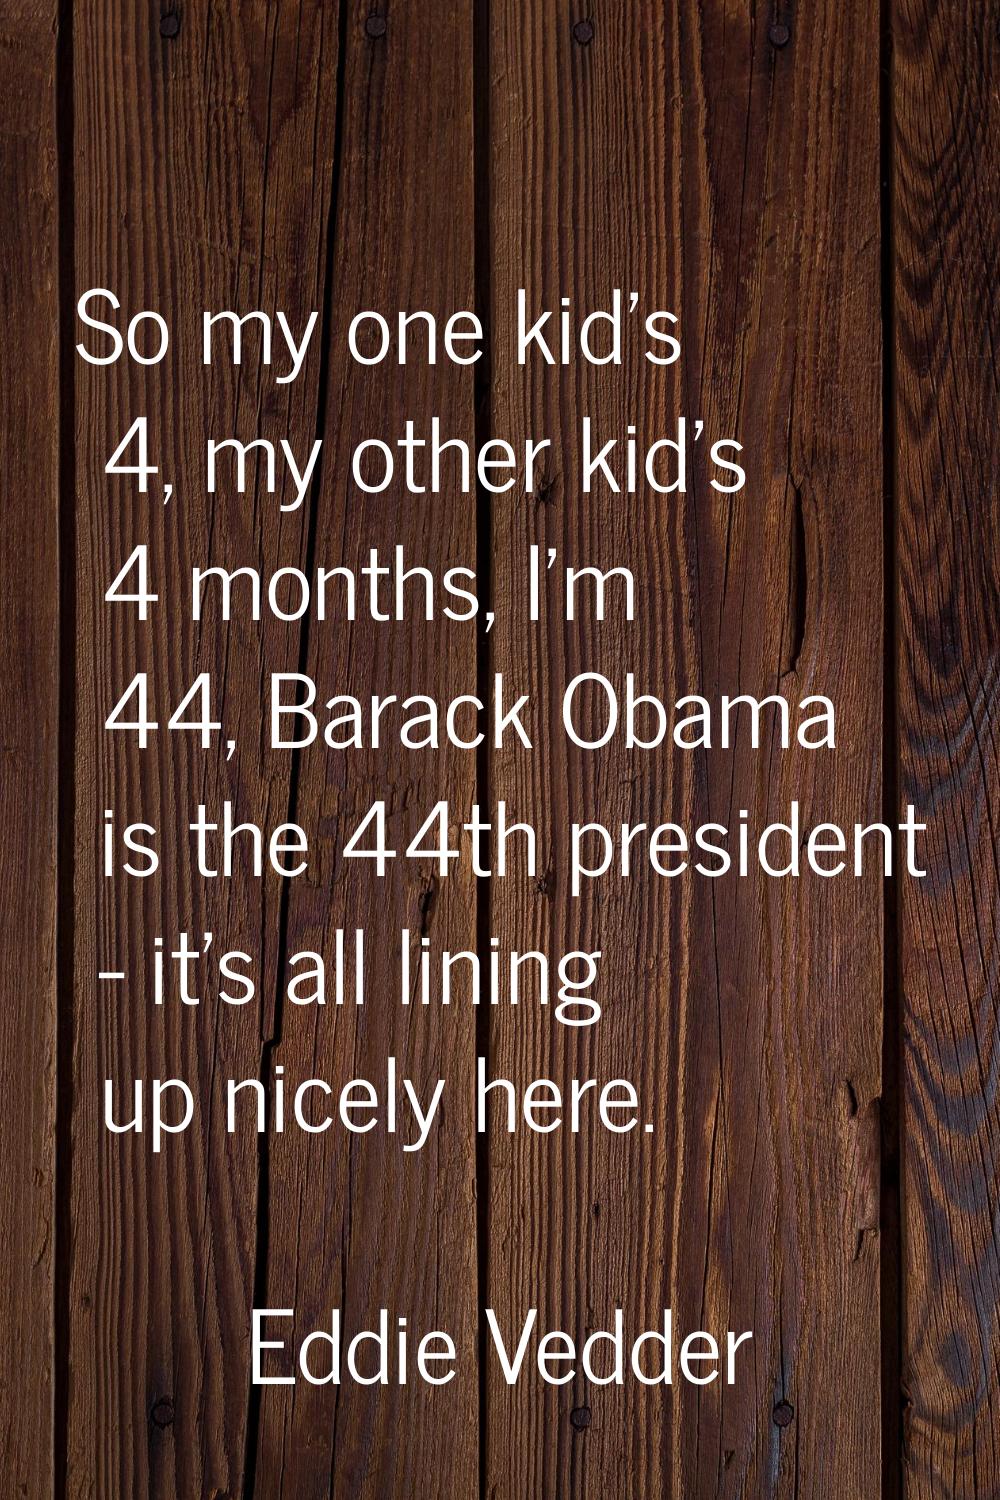 So my one kid's 4, my other kid's 4 months, I'm 44, Barack Obama is the 44th president - it's all l